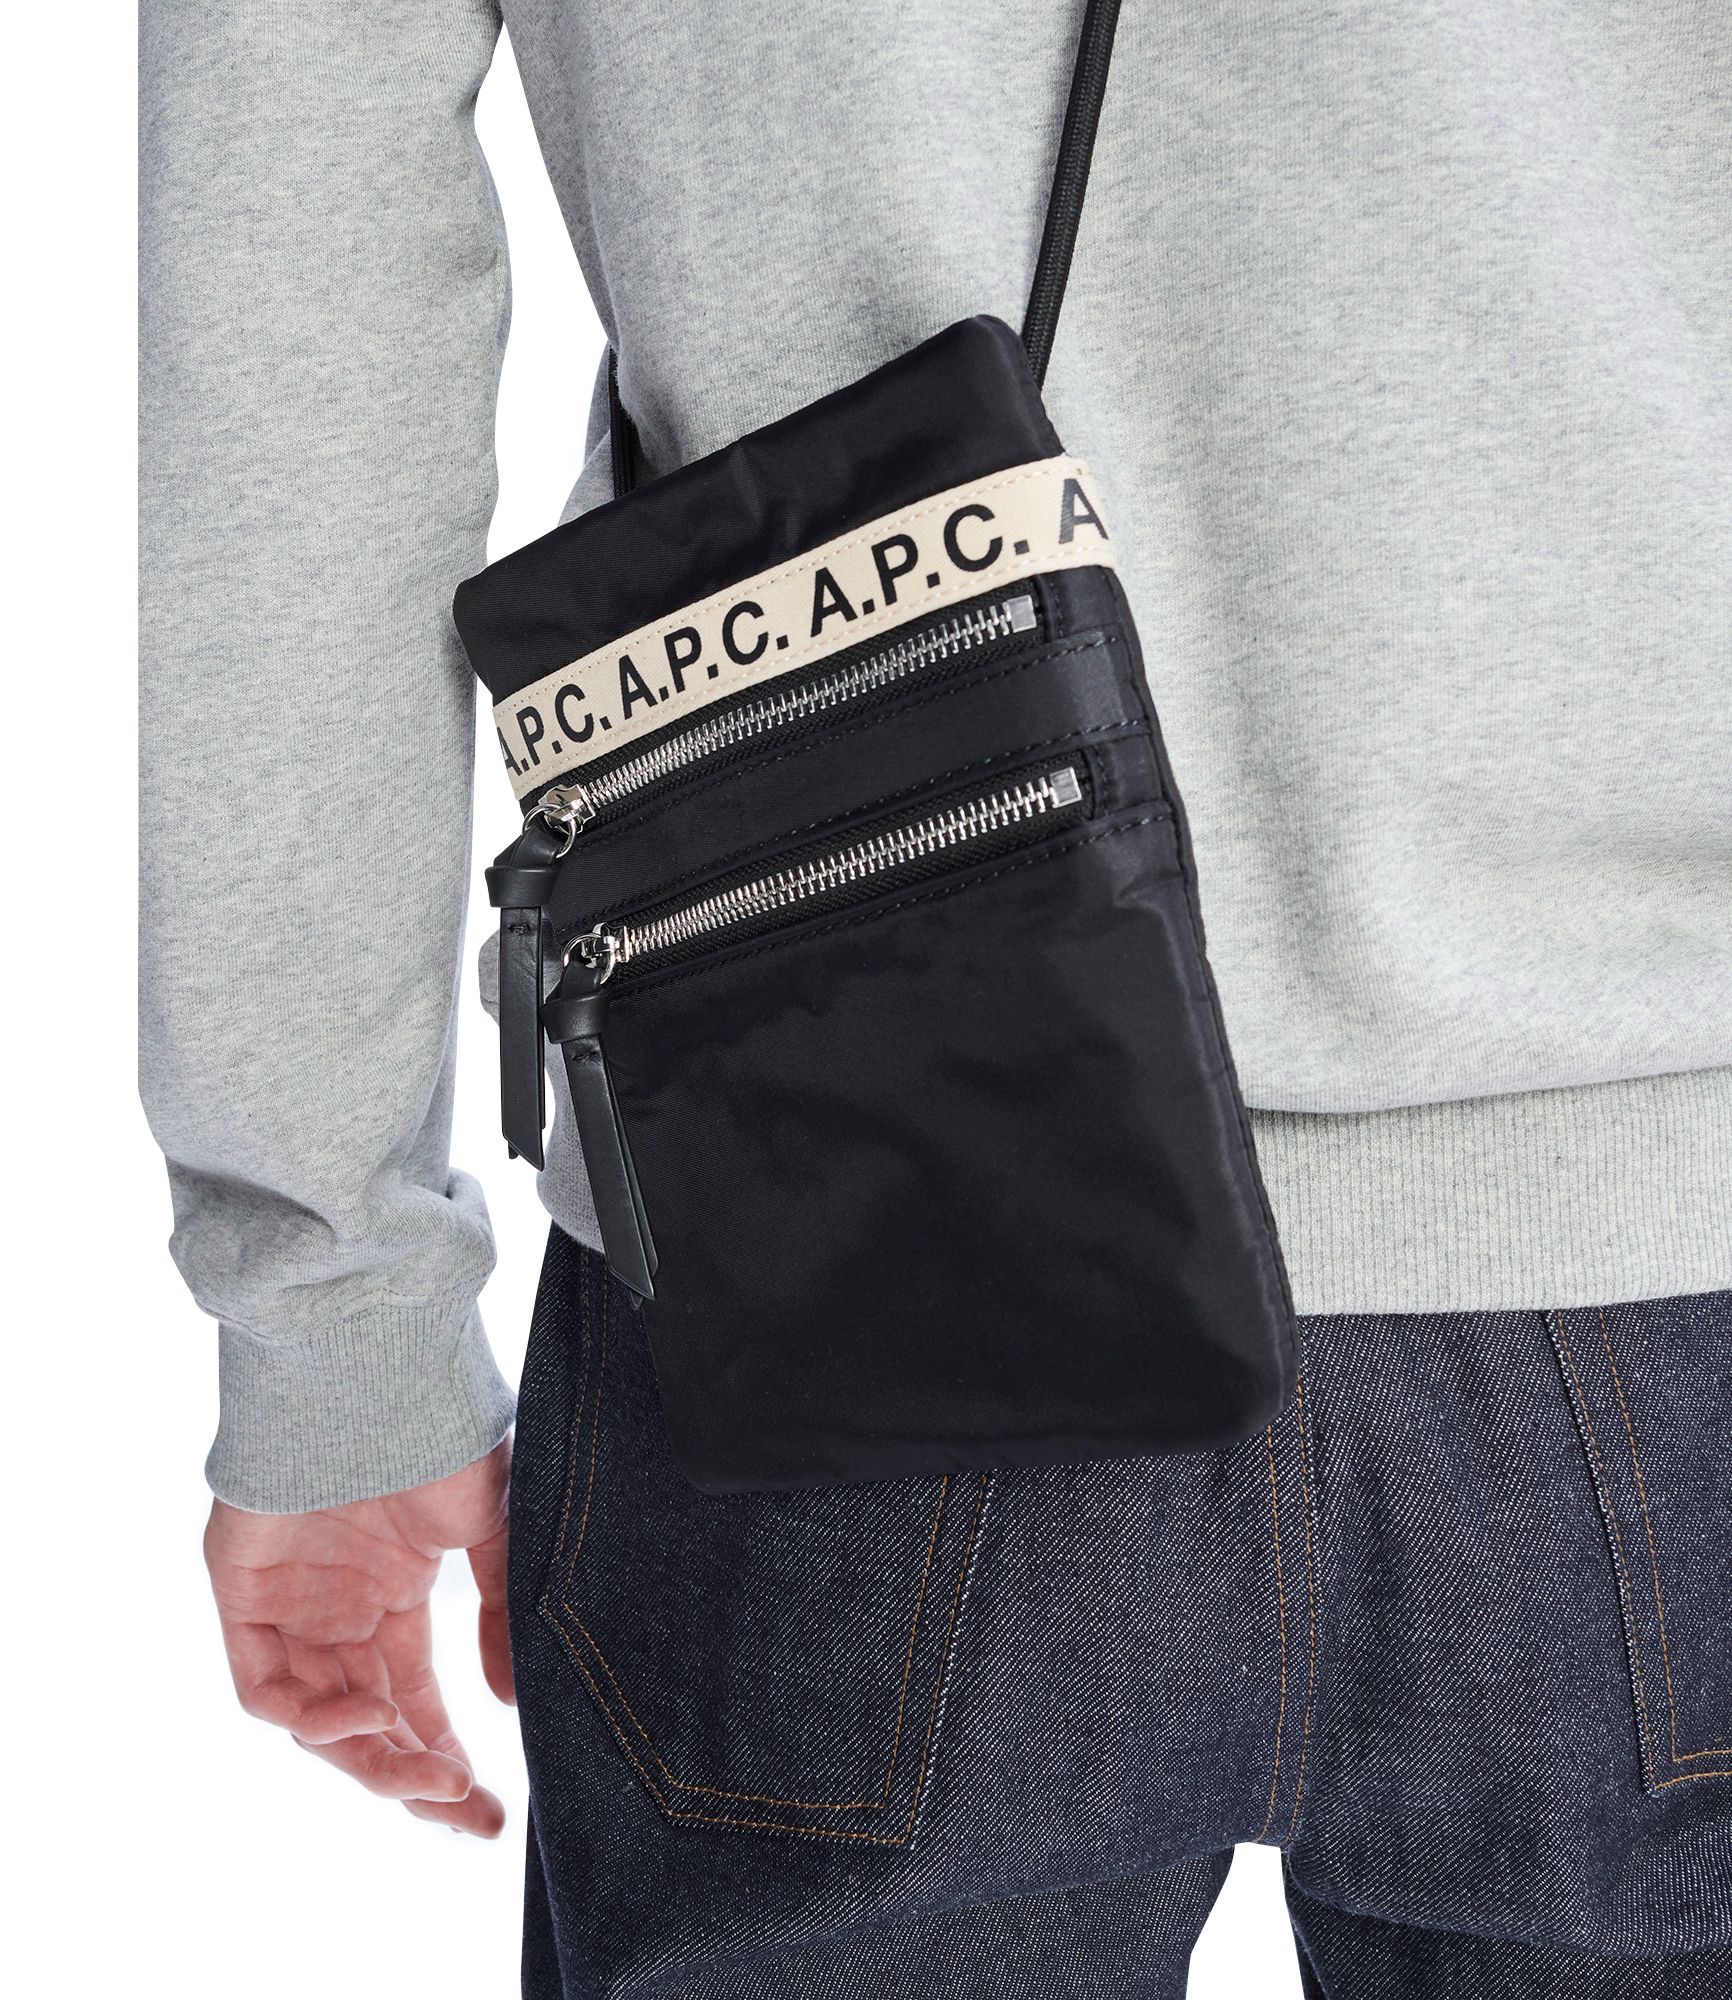 Repeat neck pouch